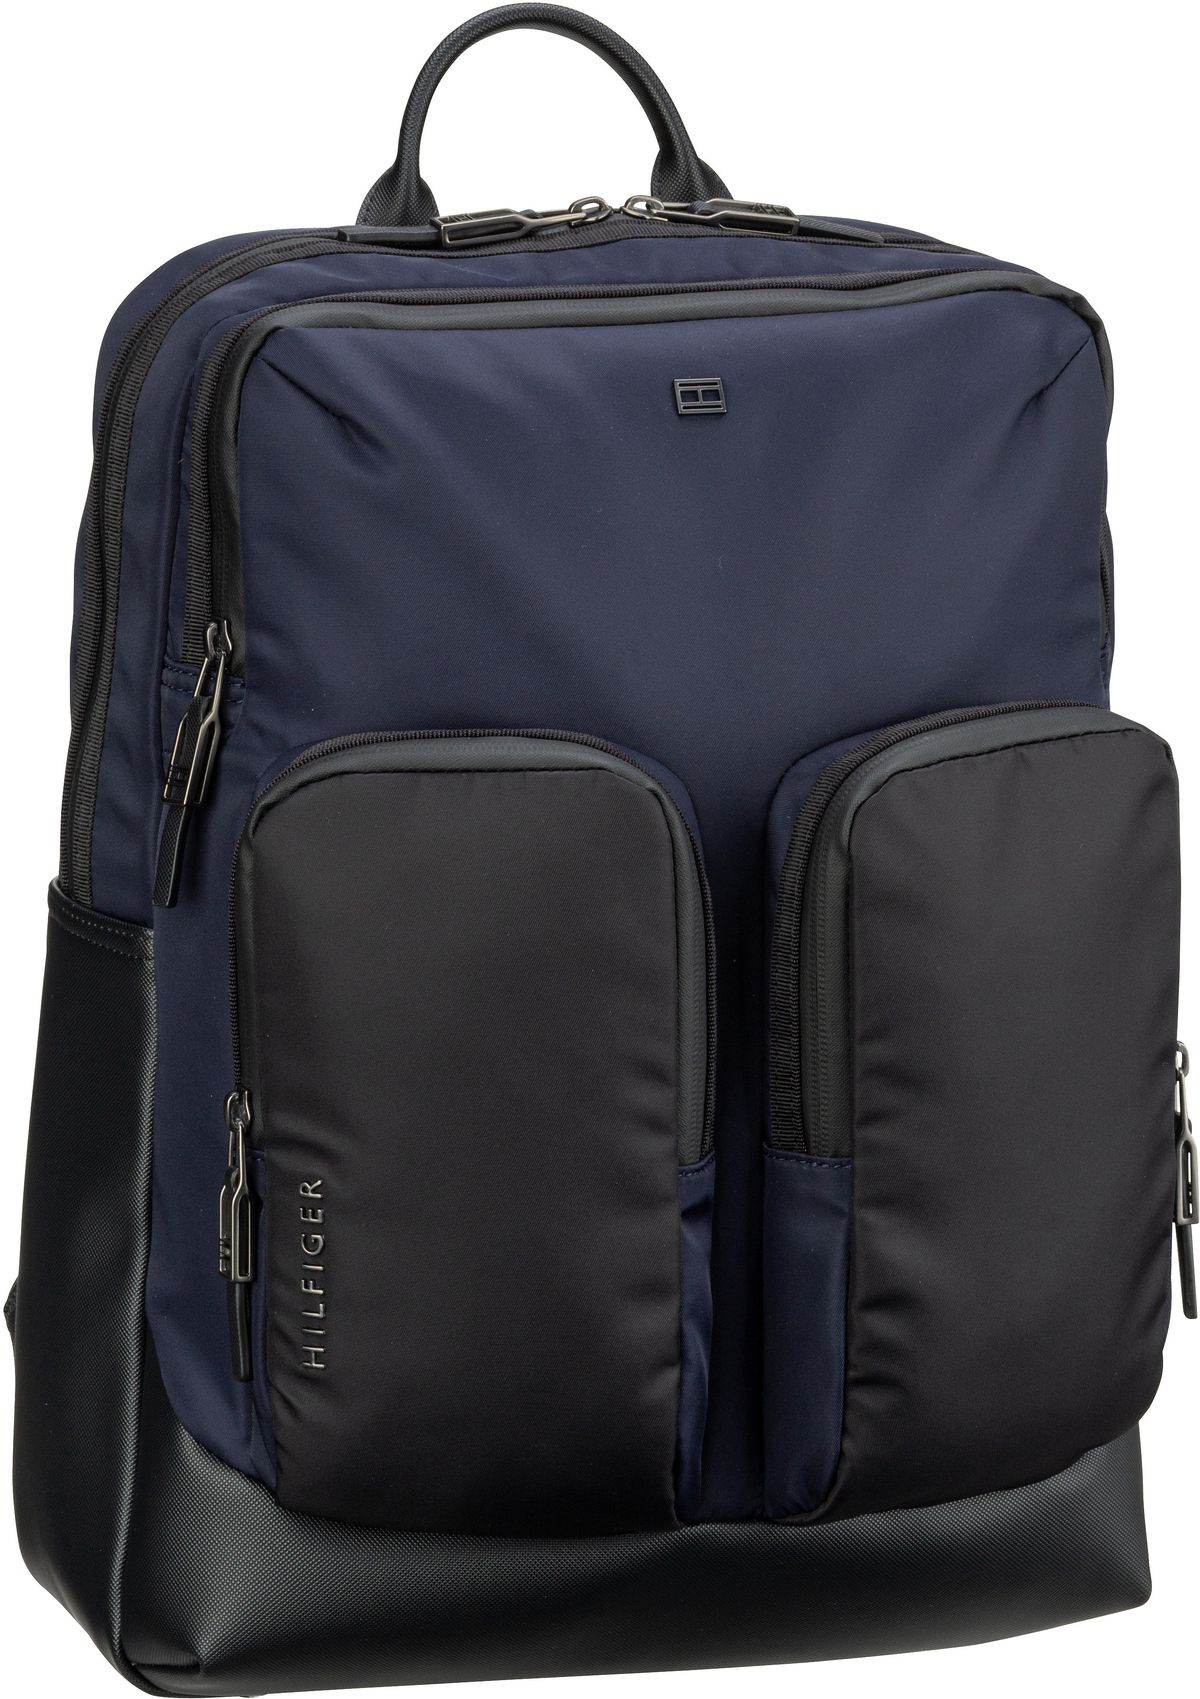 Tommy Hilfiger TH City Commuter Tech Backpack PSP23 - Space Blue